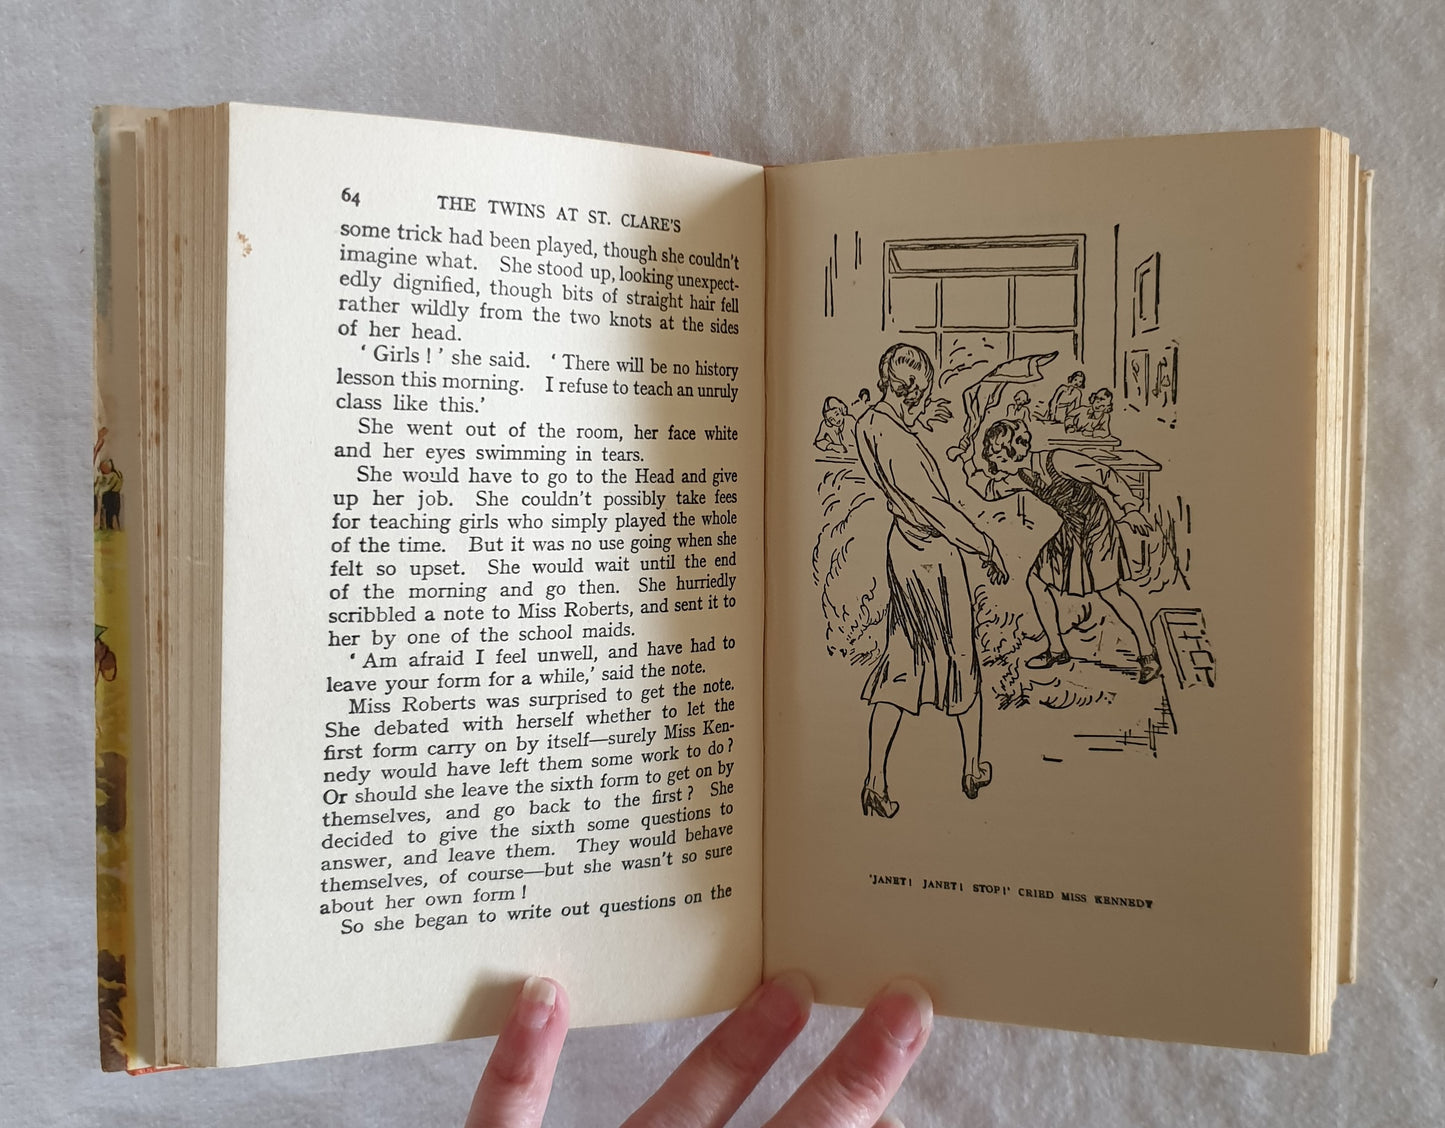 The Twins at St. Clare's by Enid Blyton